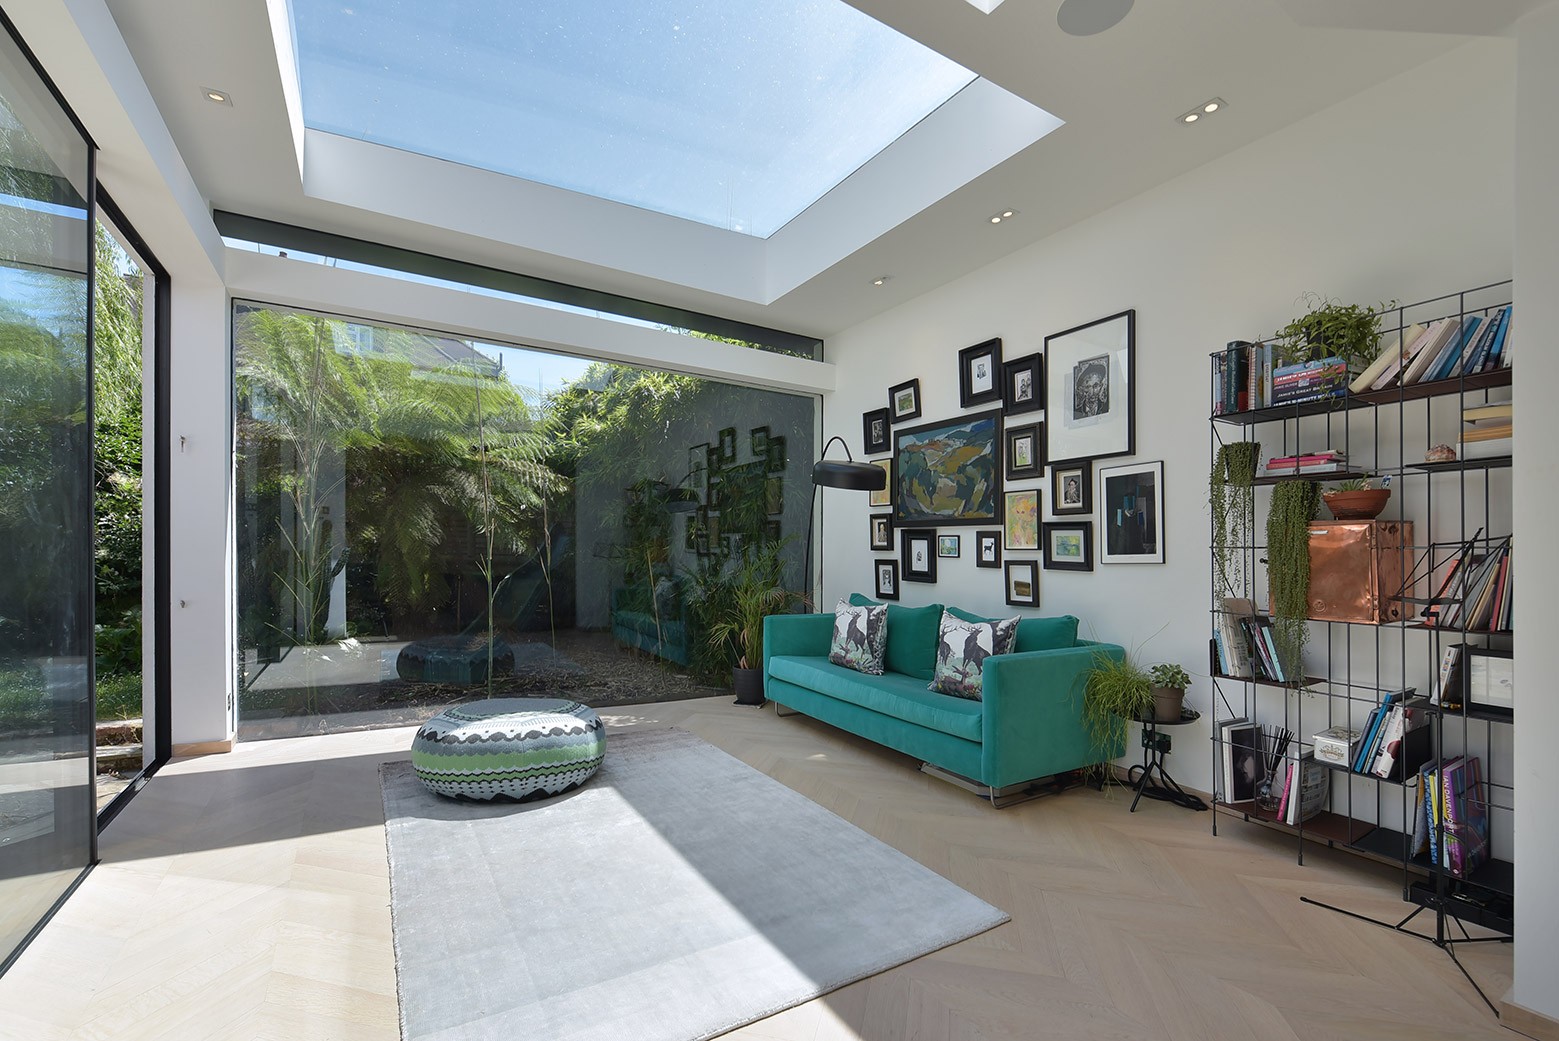 The glass-walled living room bringing the garden in